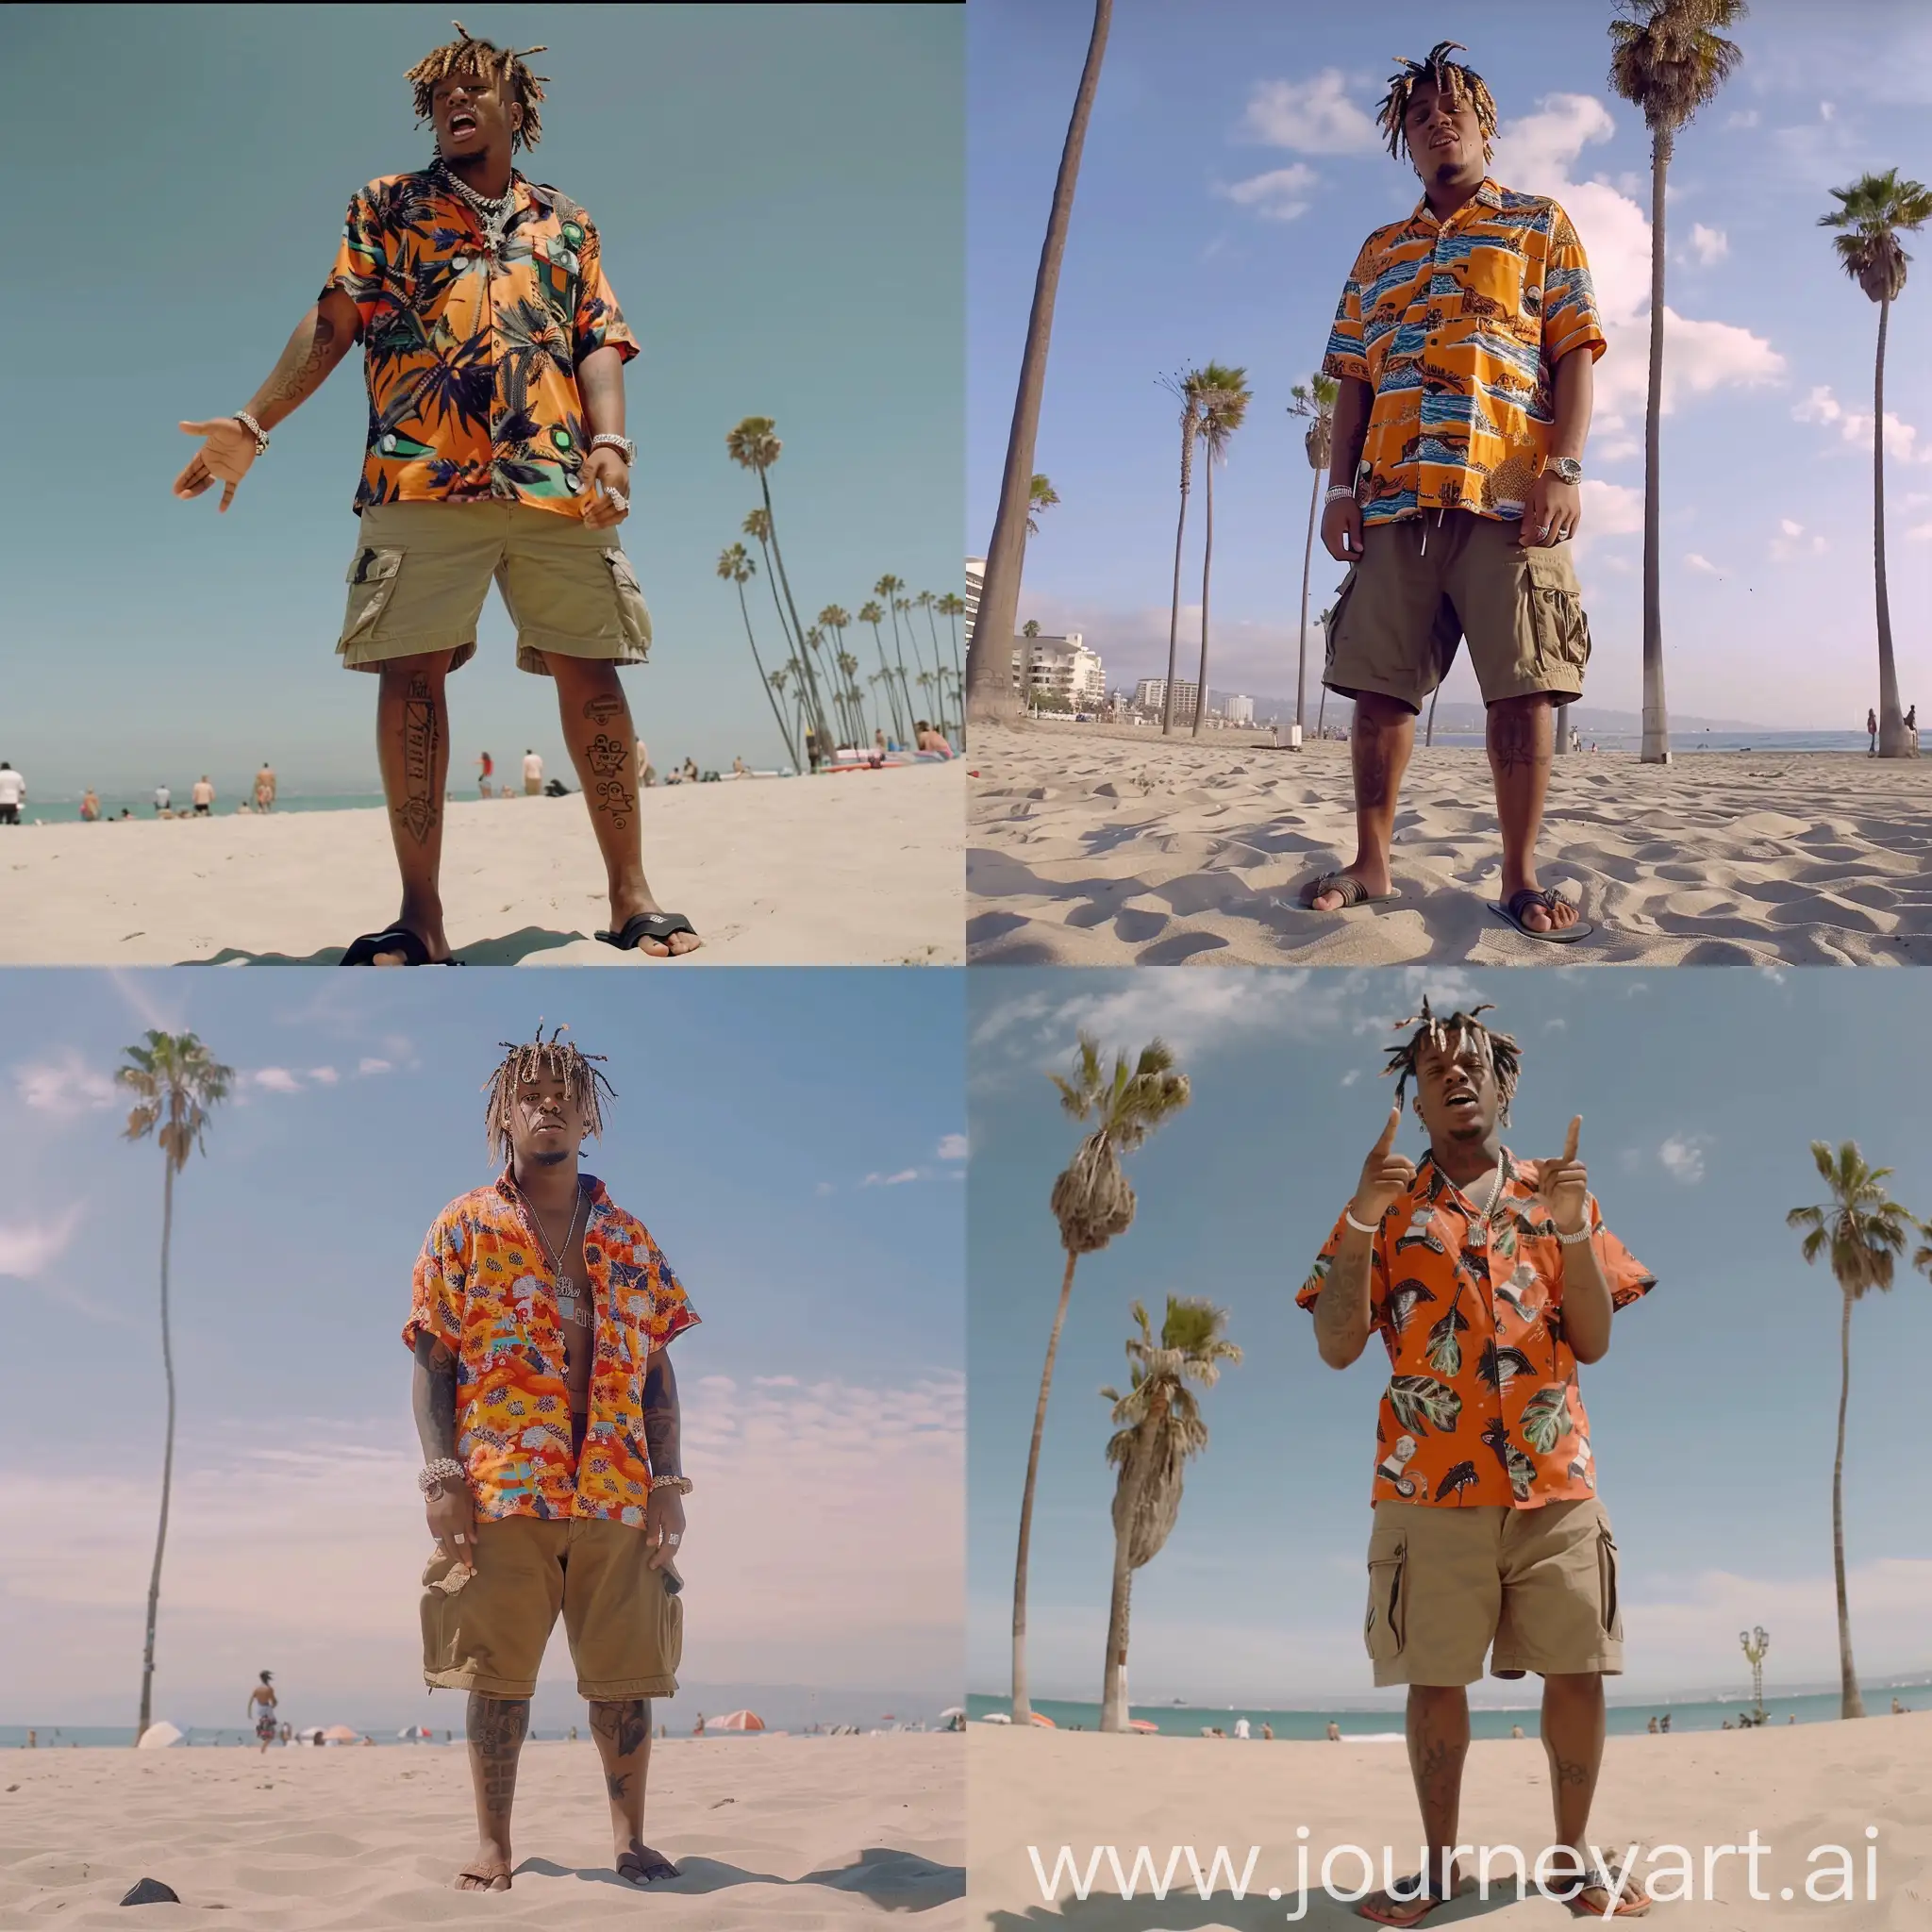 Juice Wrld in a music video singing,at Venice beach in los angeles,wearing a beach shirt with cargo shorts and sandles